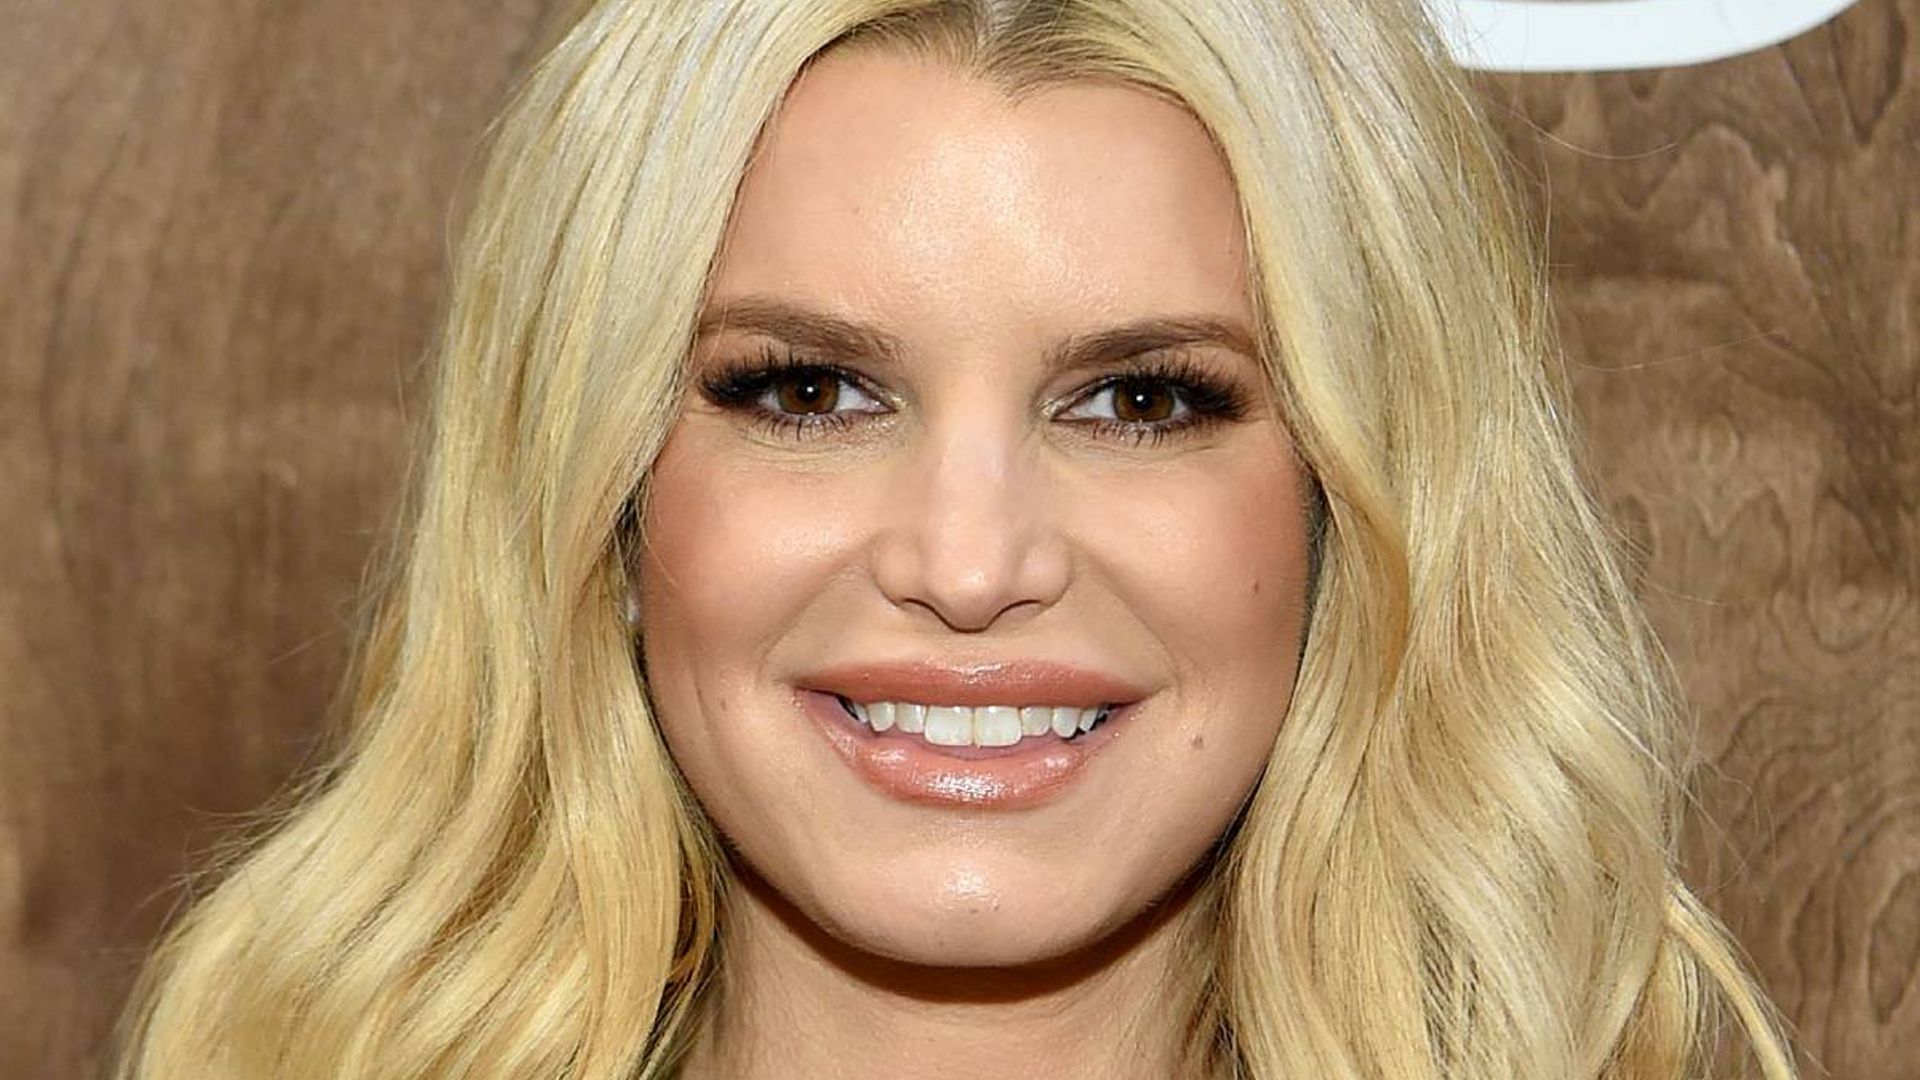 Jessica Simpson's lips send fans wild in new family photo